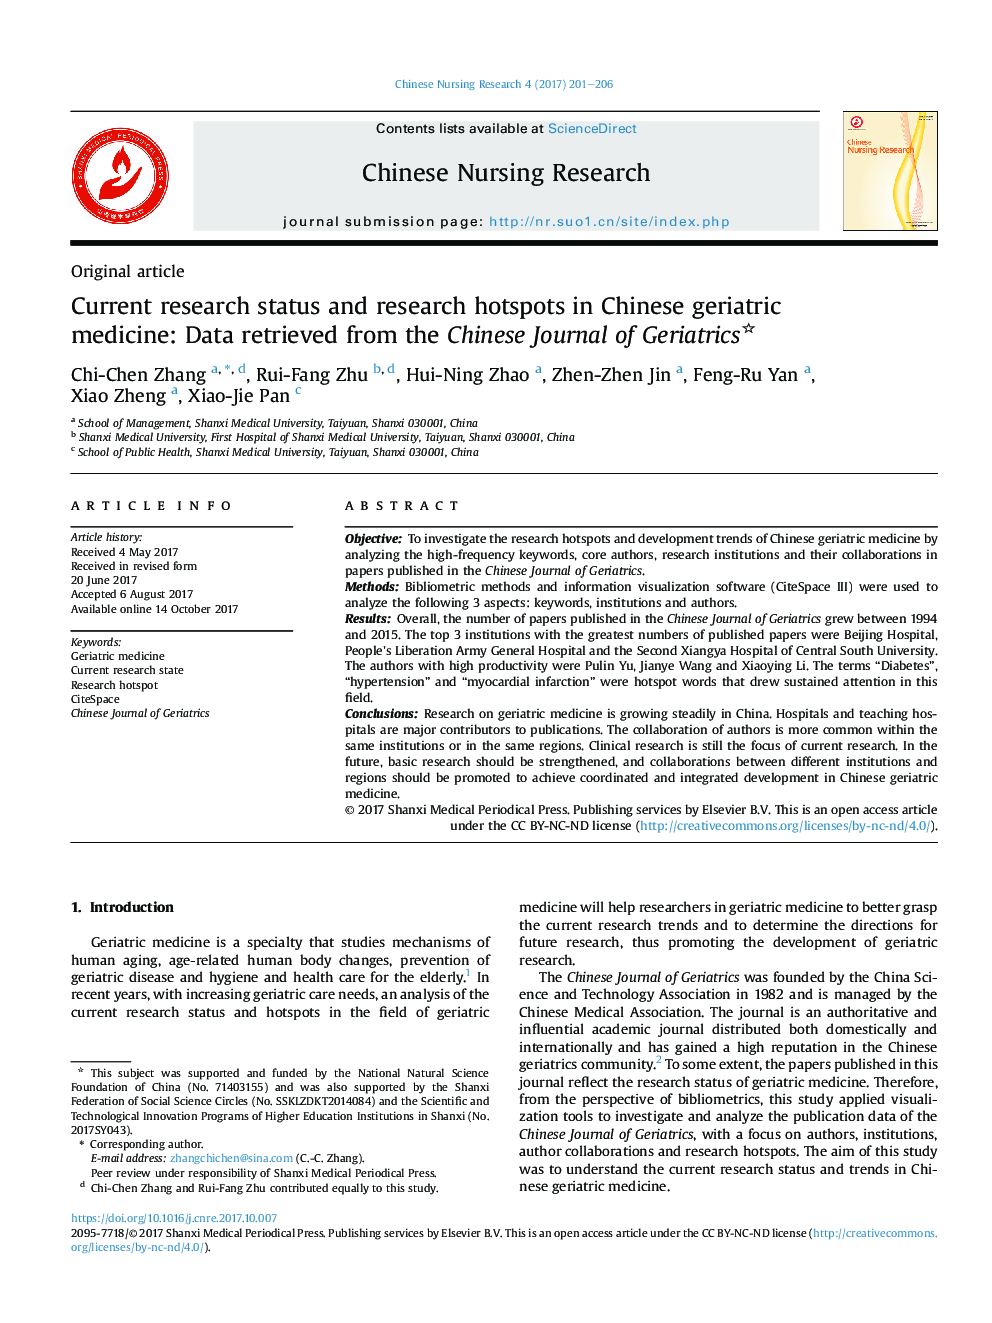 Current research status and research hotspots in Chinese geriatric medicine: Data retrieved from the Chinese Journal of Geriatrics